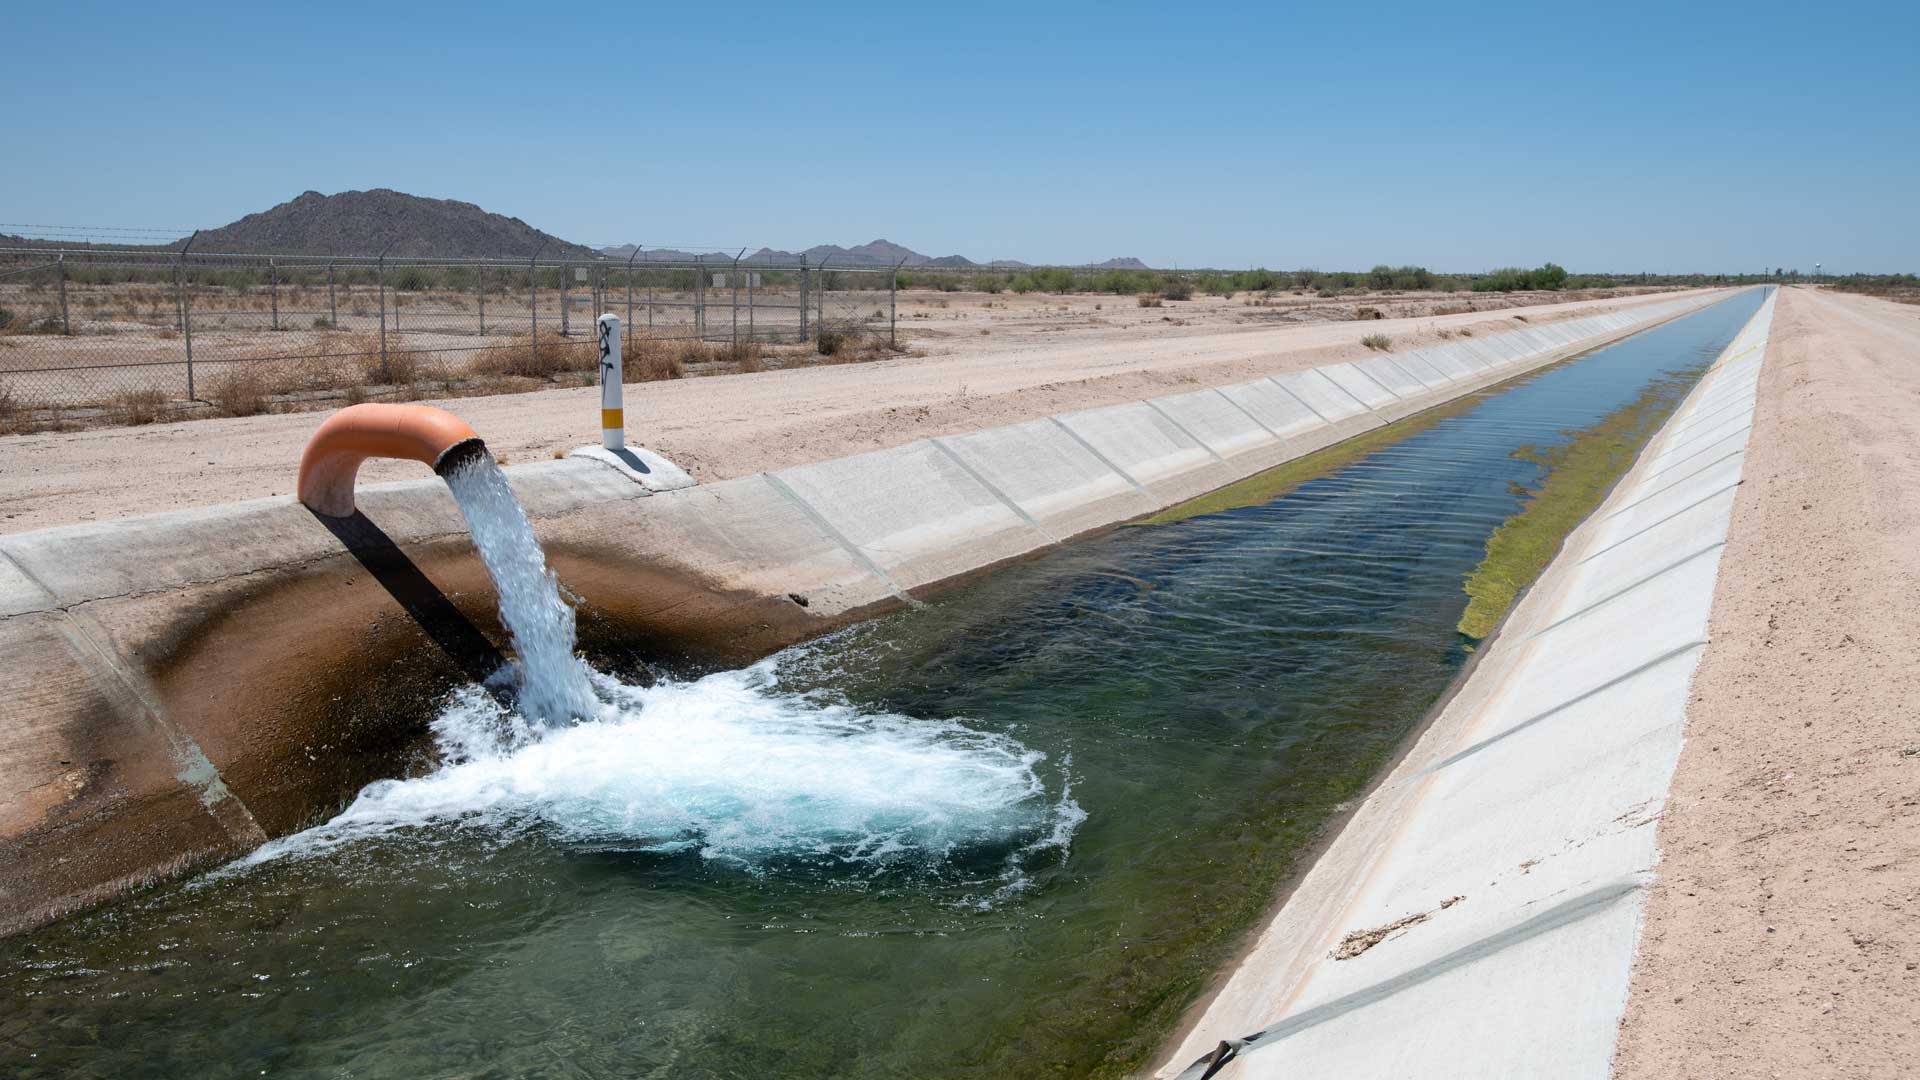 Water enters an irrigation canal on the Gila River Indian Reservation on May 7, 2021. The Gila River Indian Community is among the most important tribal players in ongoing negotiations about using water from the Colorado River.
